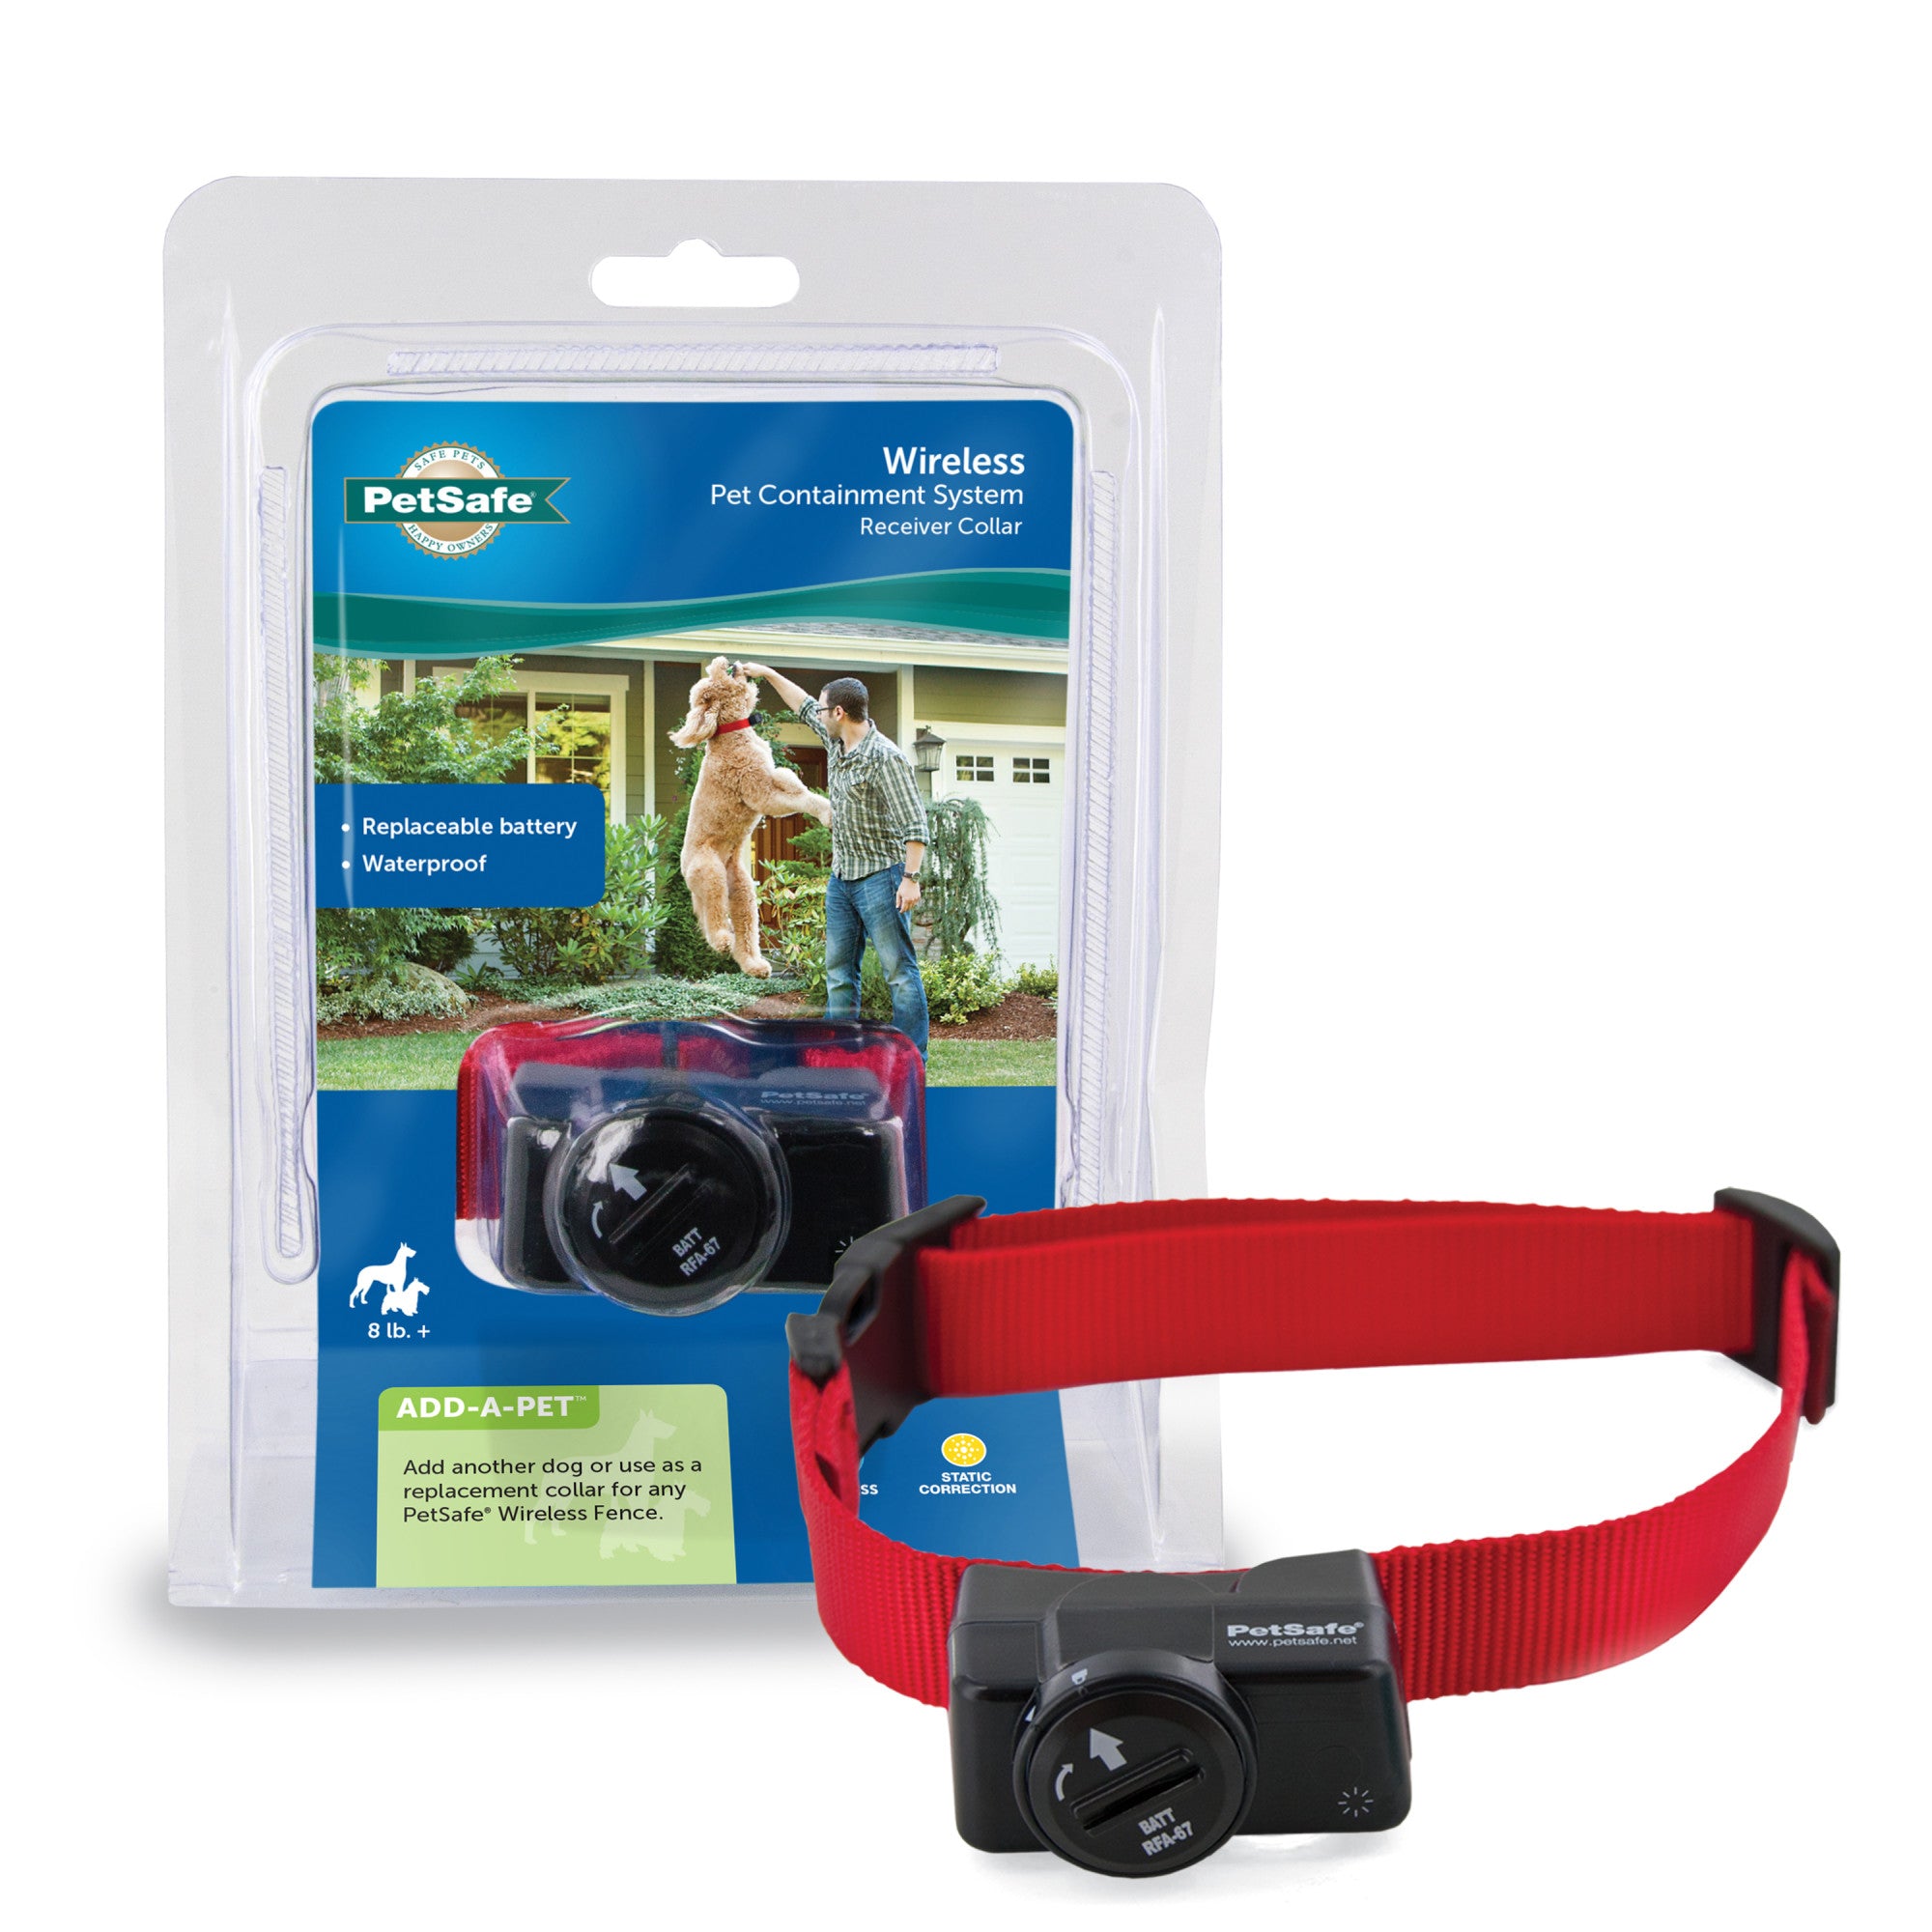 PetSafe Wireless Pet Containment System Receiver Collar Only for